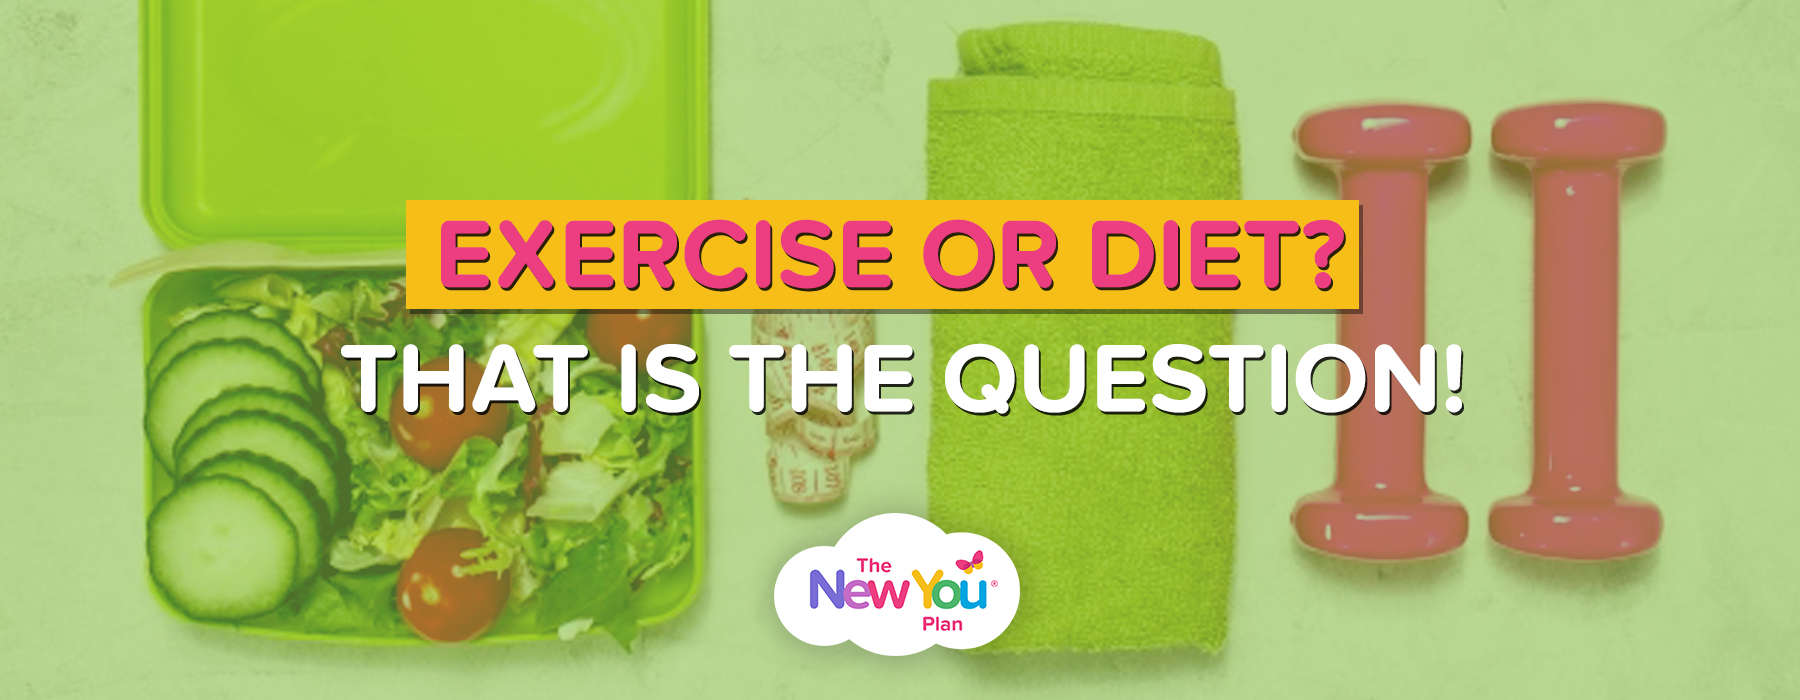 Is diet or exercise better?